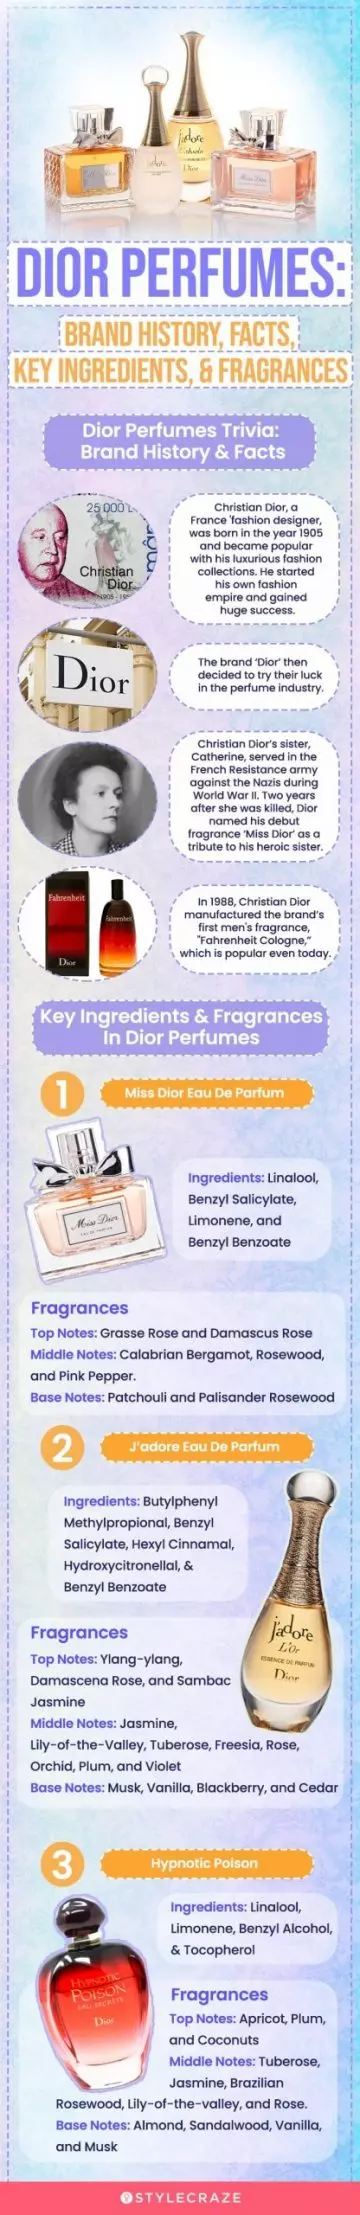 Dior Perfumes: Brand History, Facts, Key Ingredients (infographic)